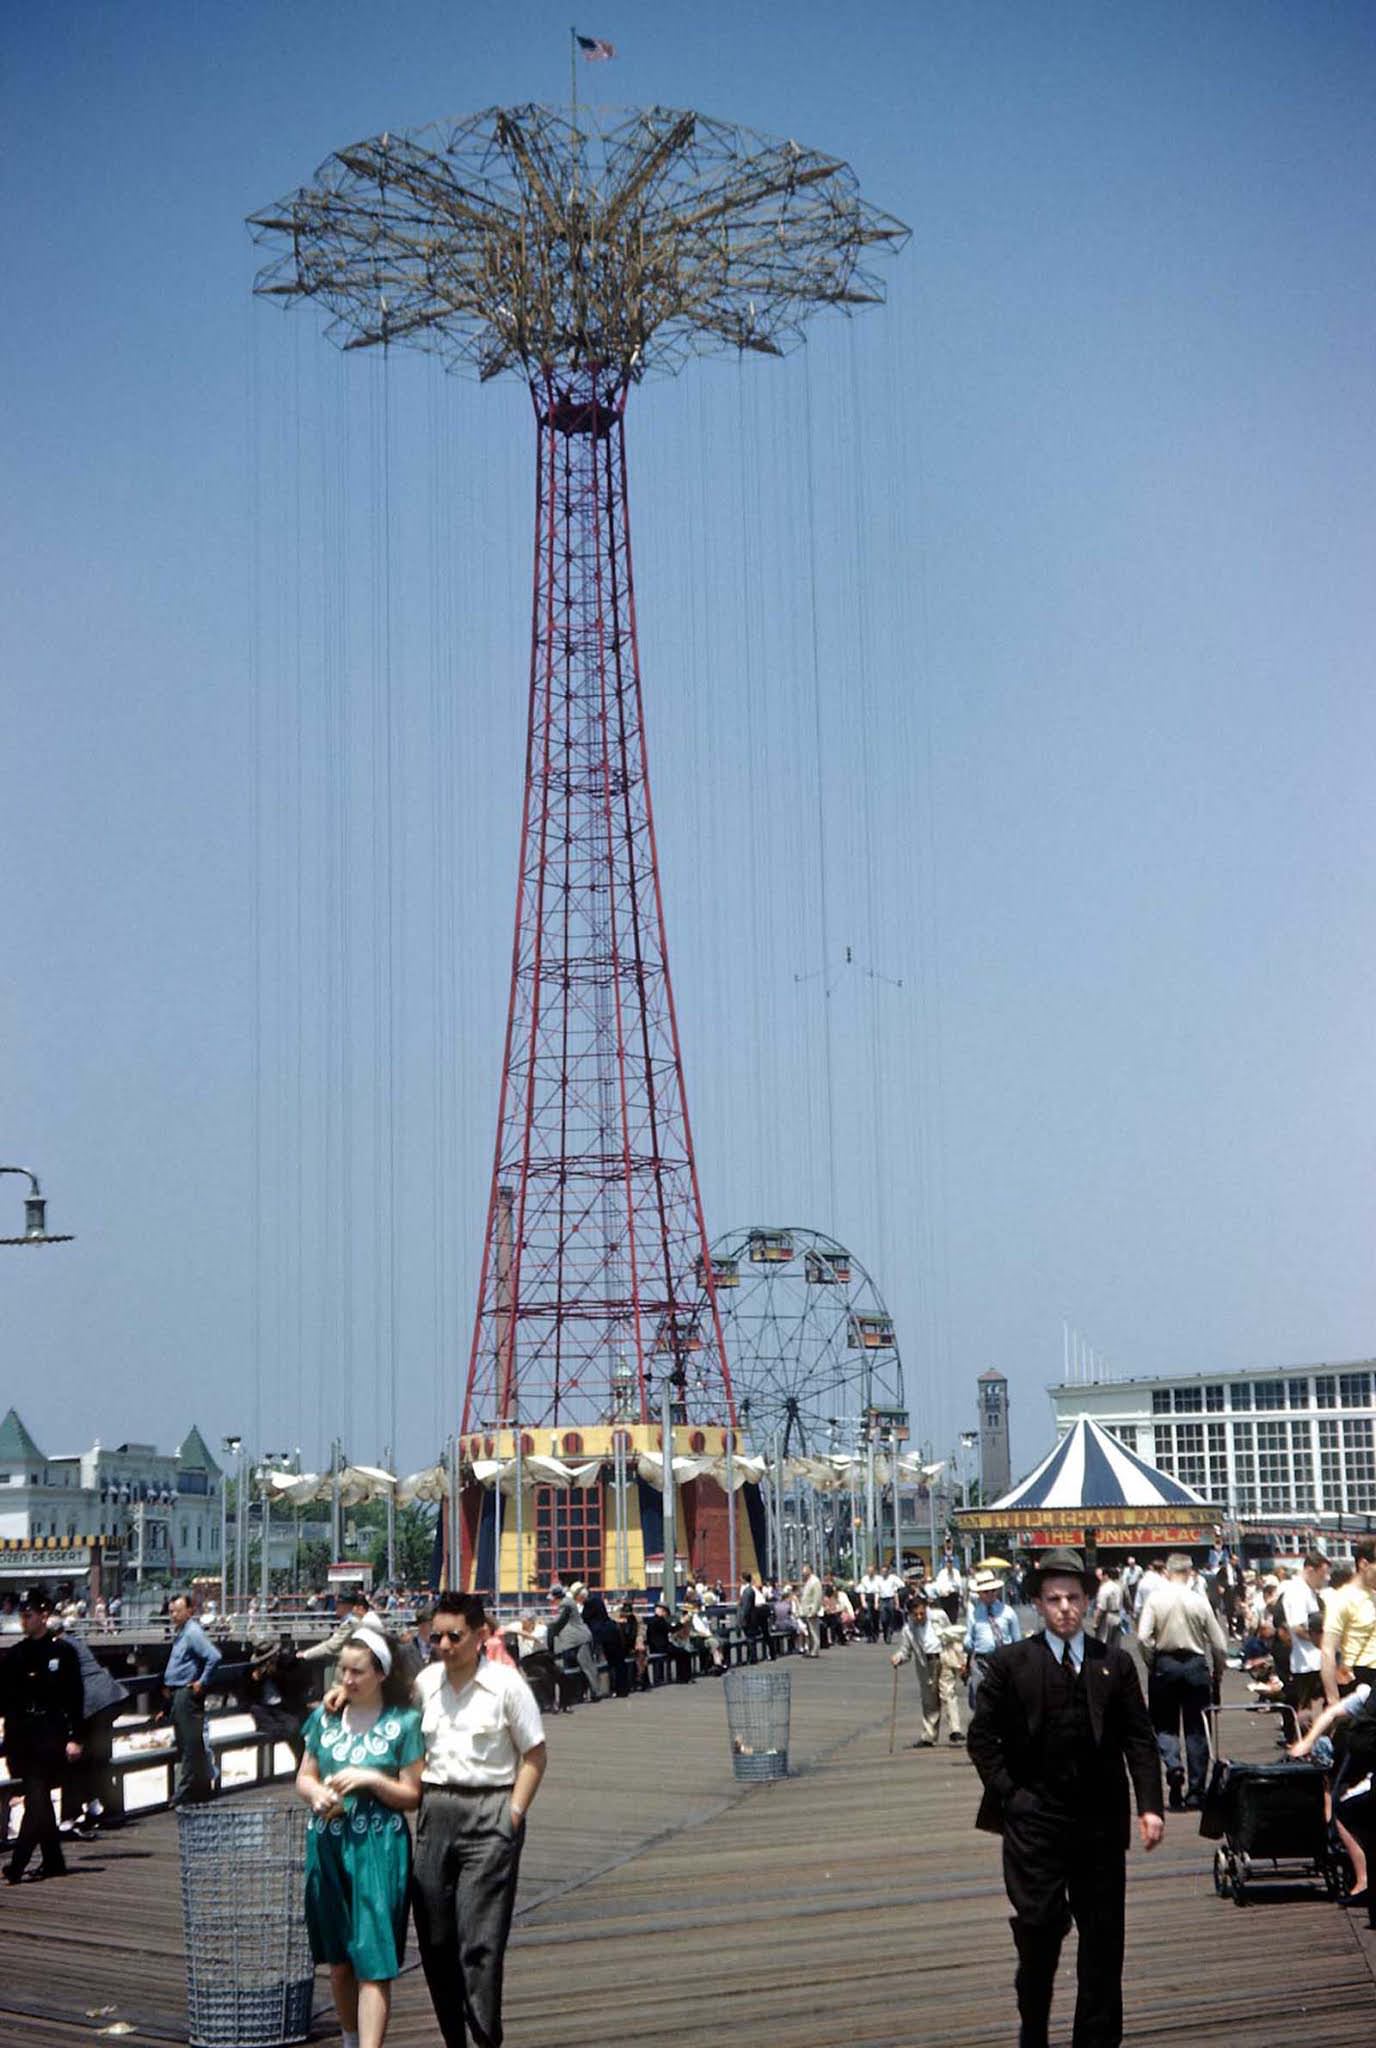 The Coney Island boardwalk and the famous Parachute Jump in Steeplechase Park, built as part of the 1939 New York World’s Fair and moved in 1941.